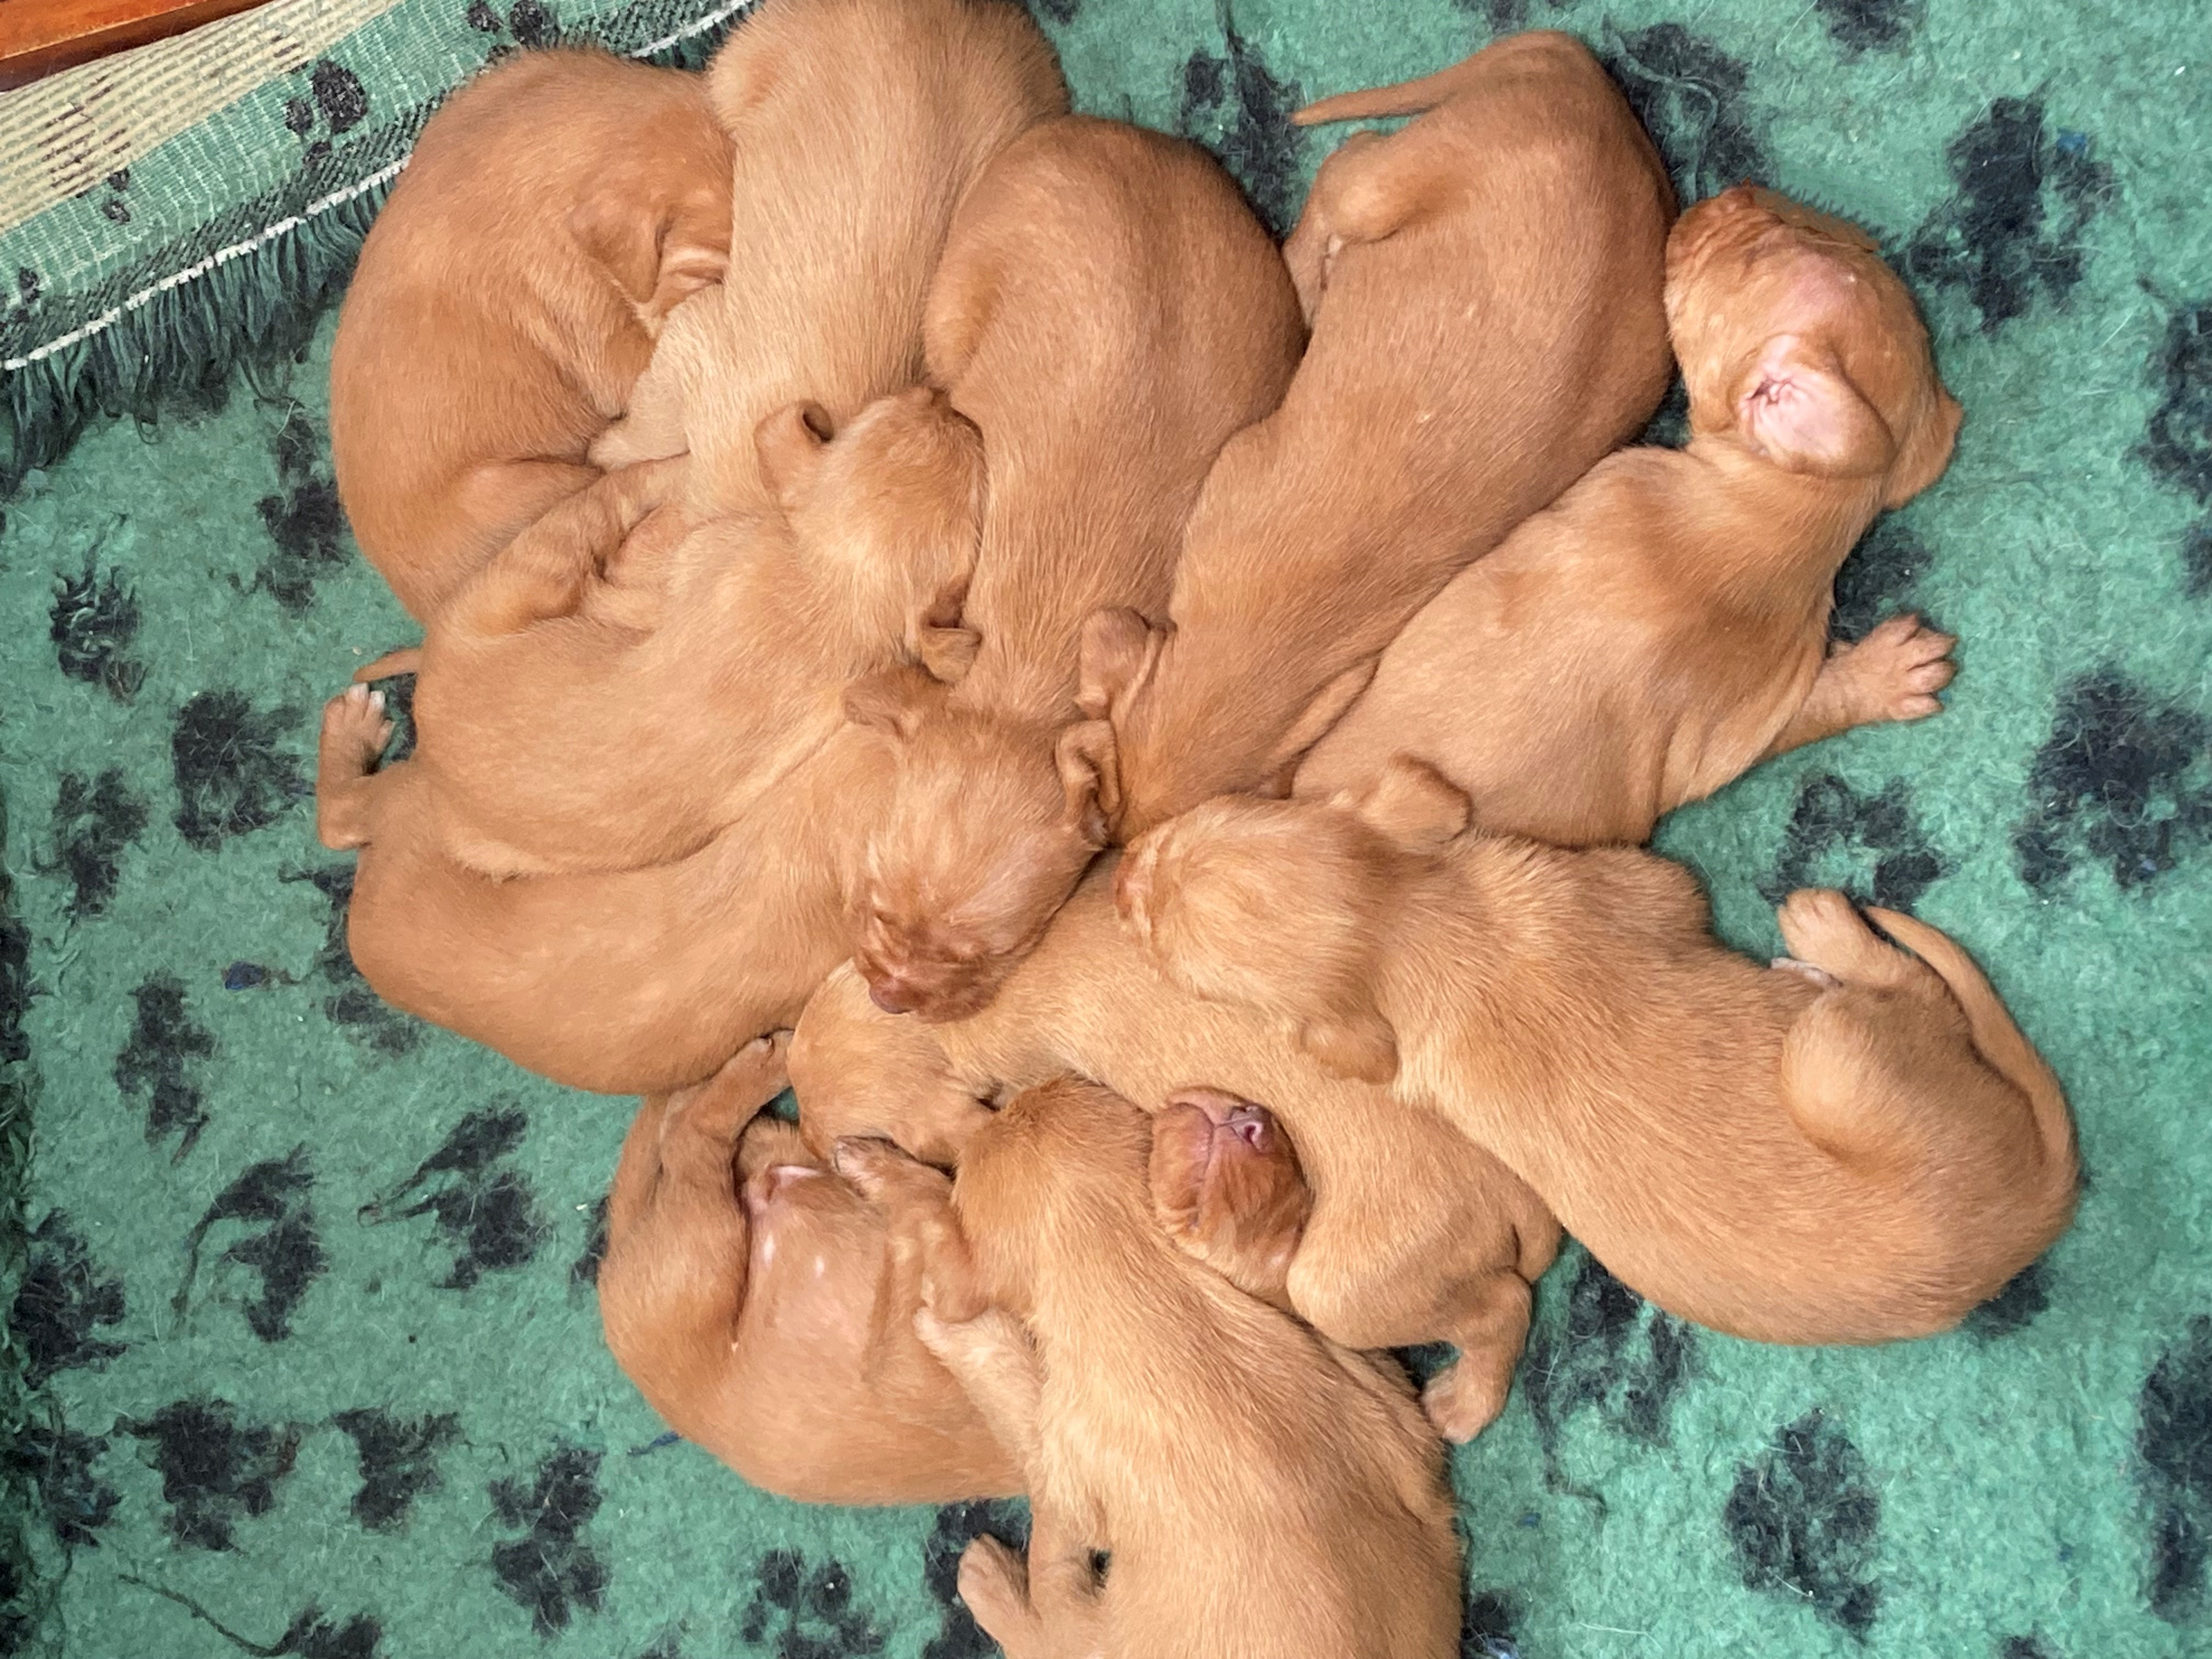 Contented pile of puppies